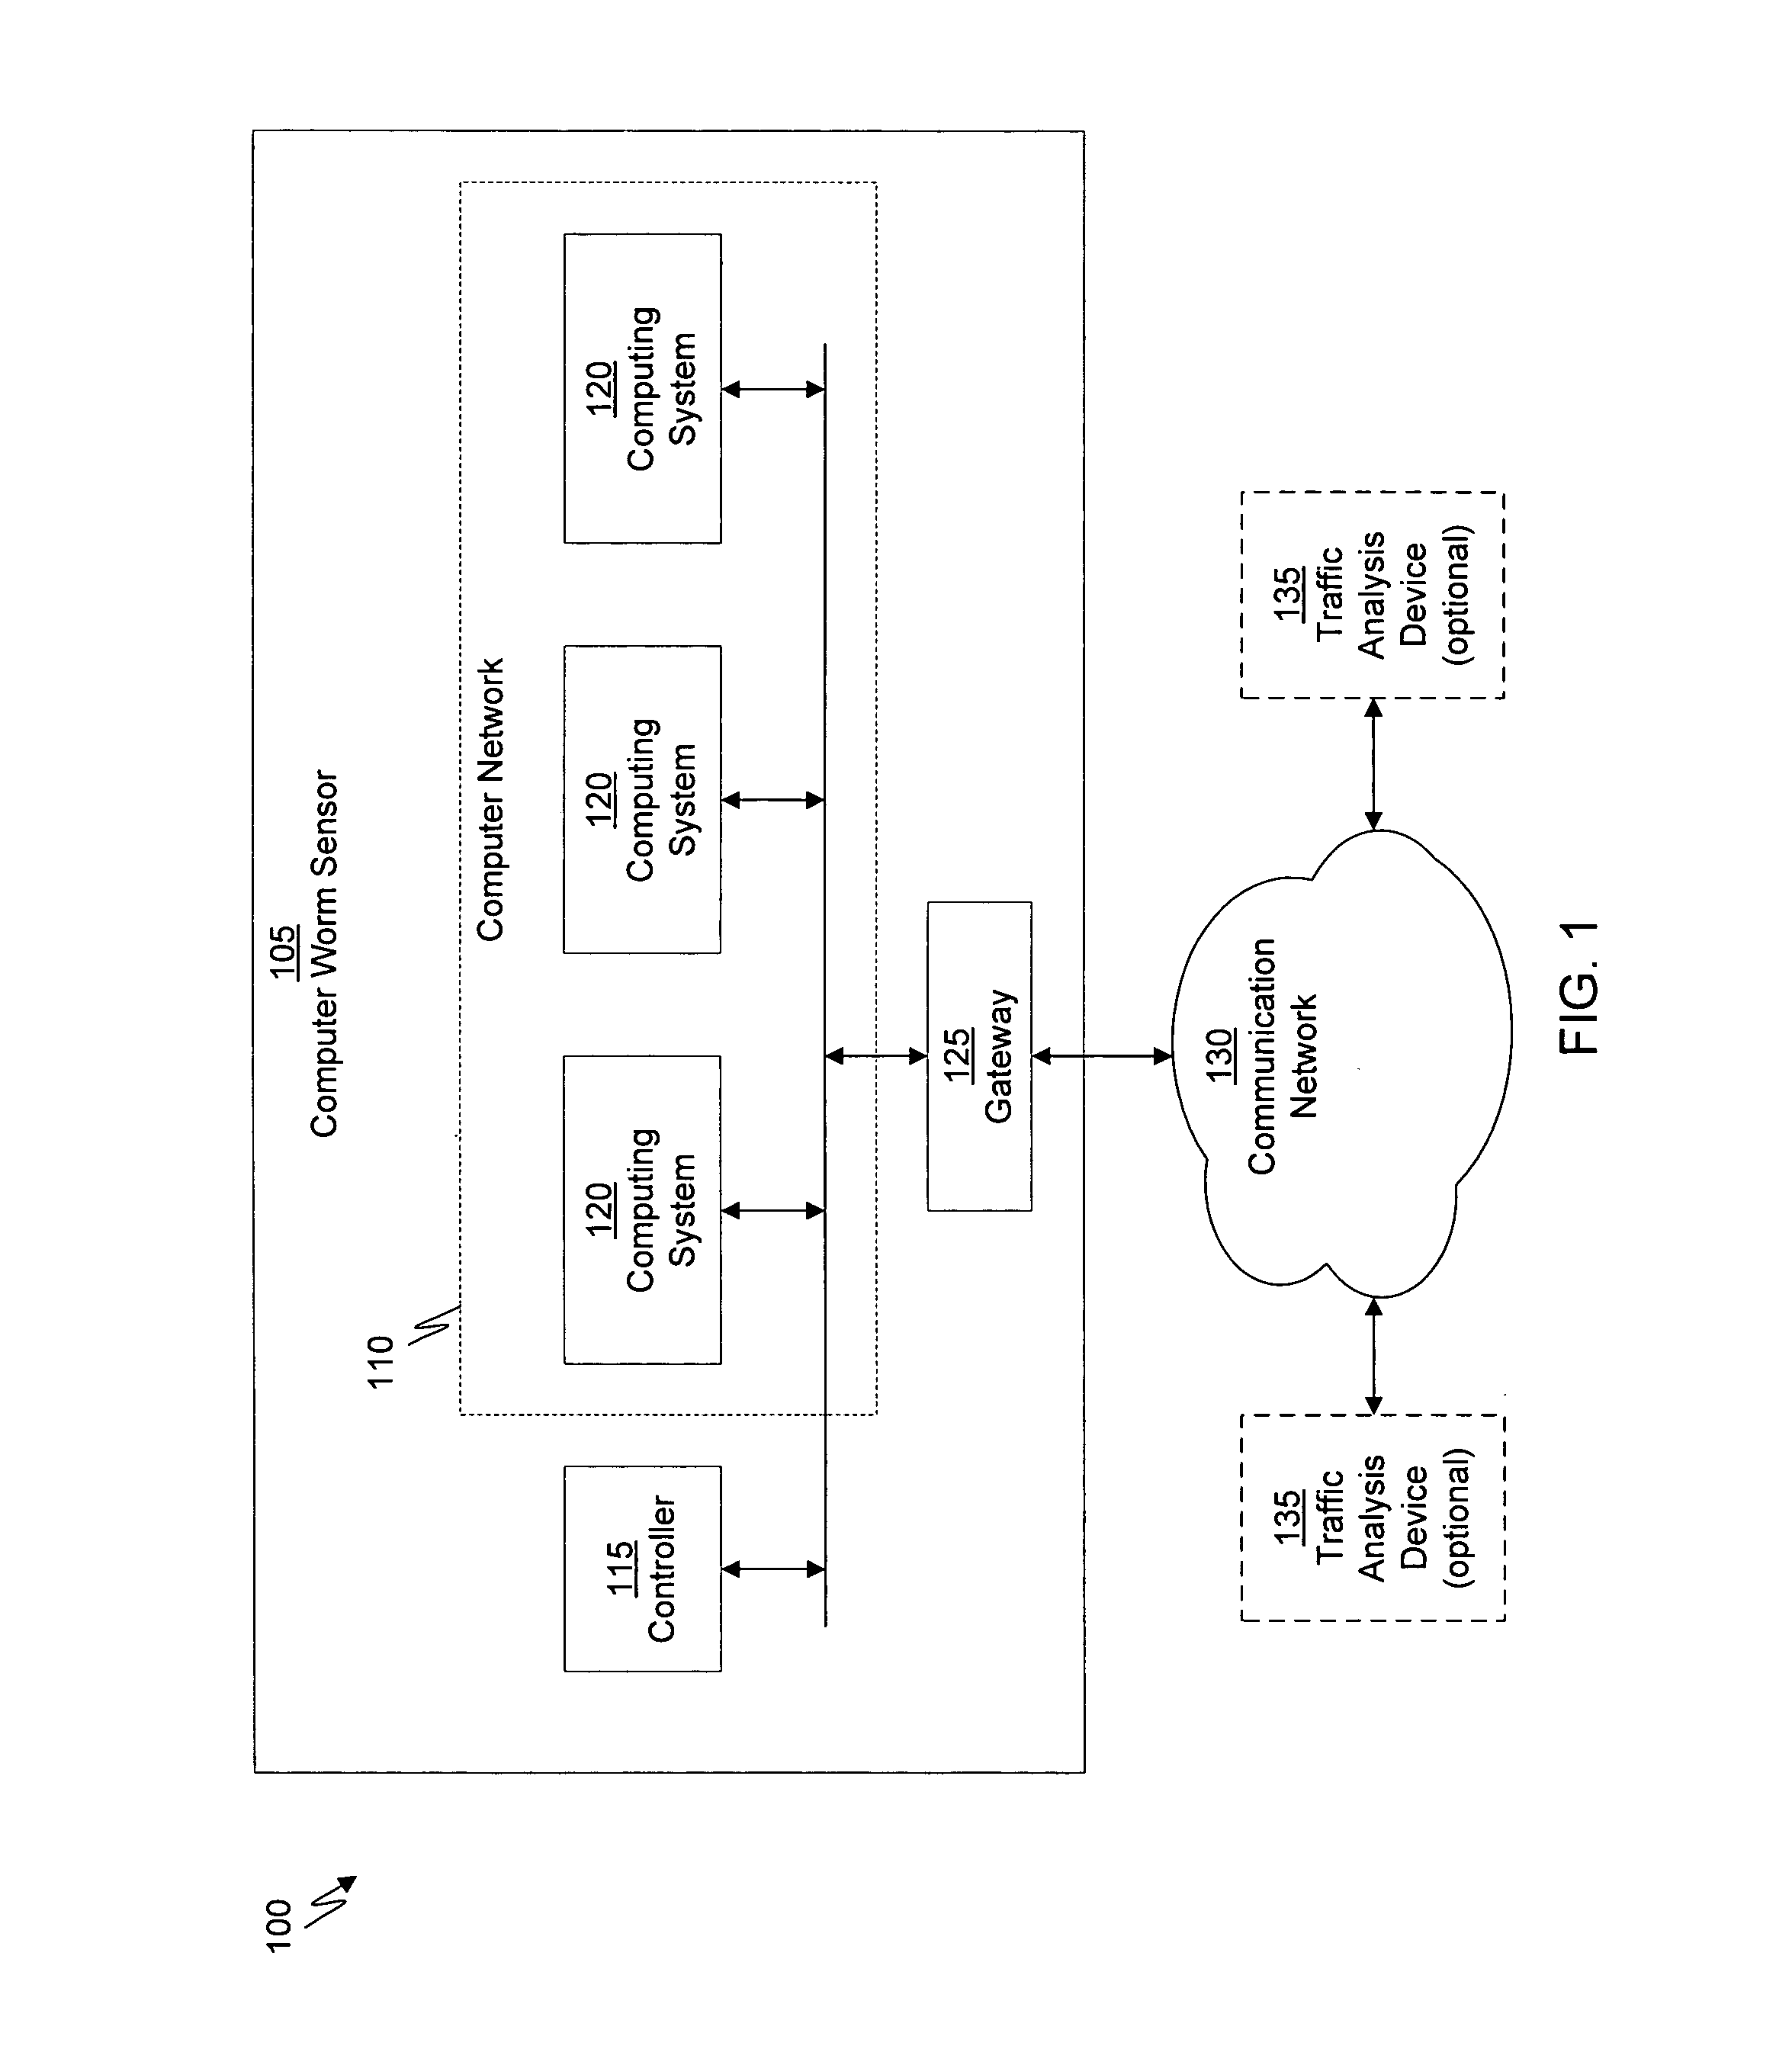 System and method of detecting computer worms